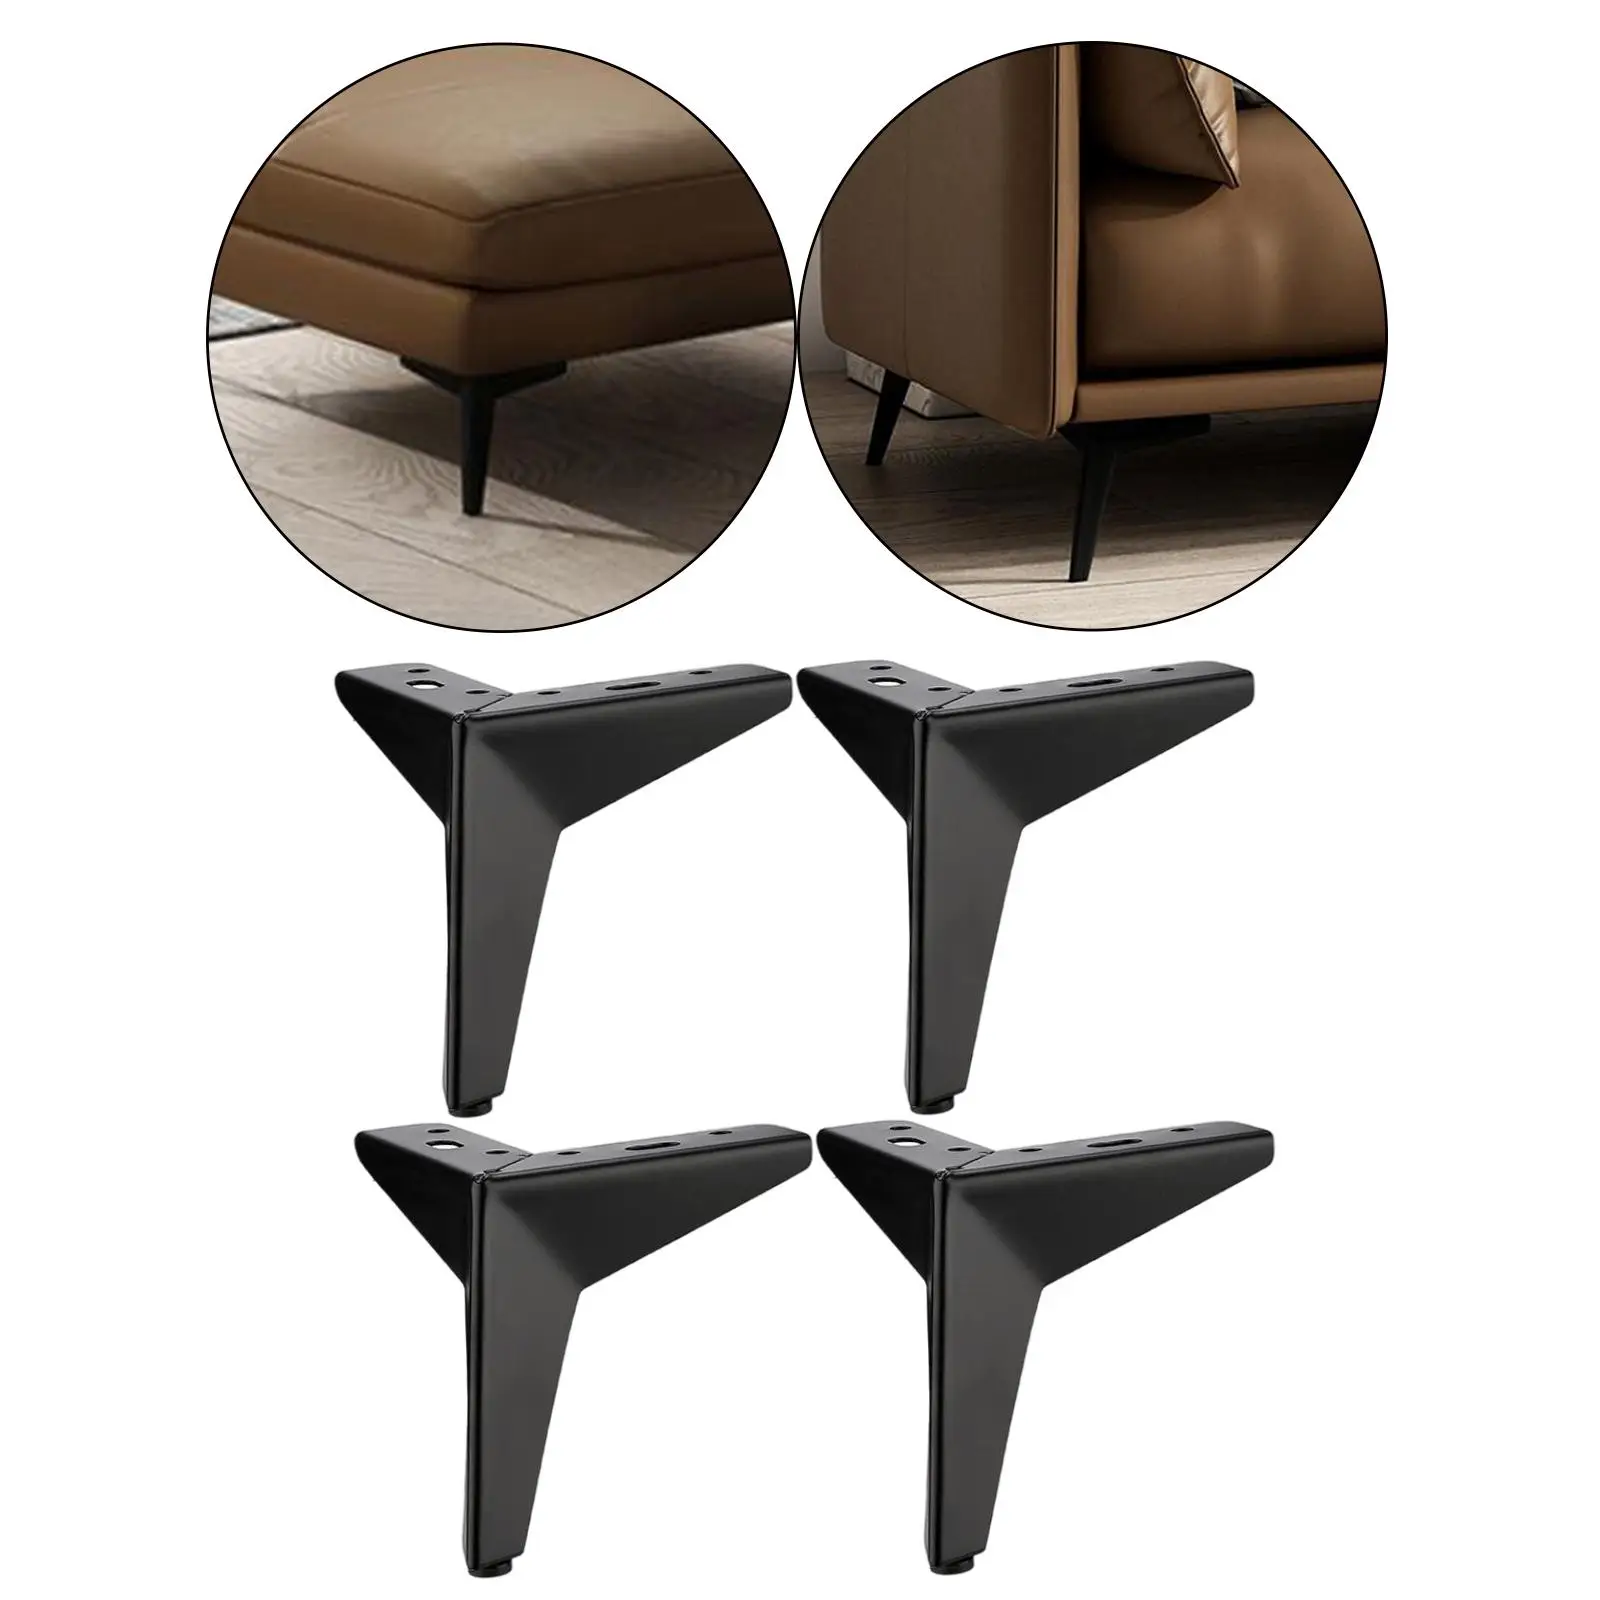 4-Pack Iron Triangle Furniture Legs Replacement Legs Modern Style Loveseat Couch Leg for Chair Desk, TV Cupboard, Coffee Table,